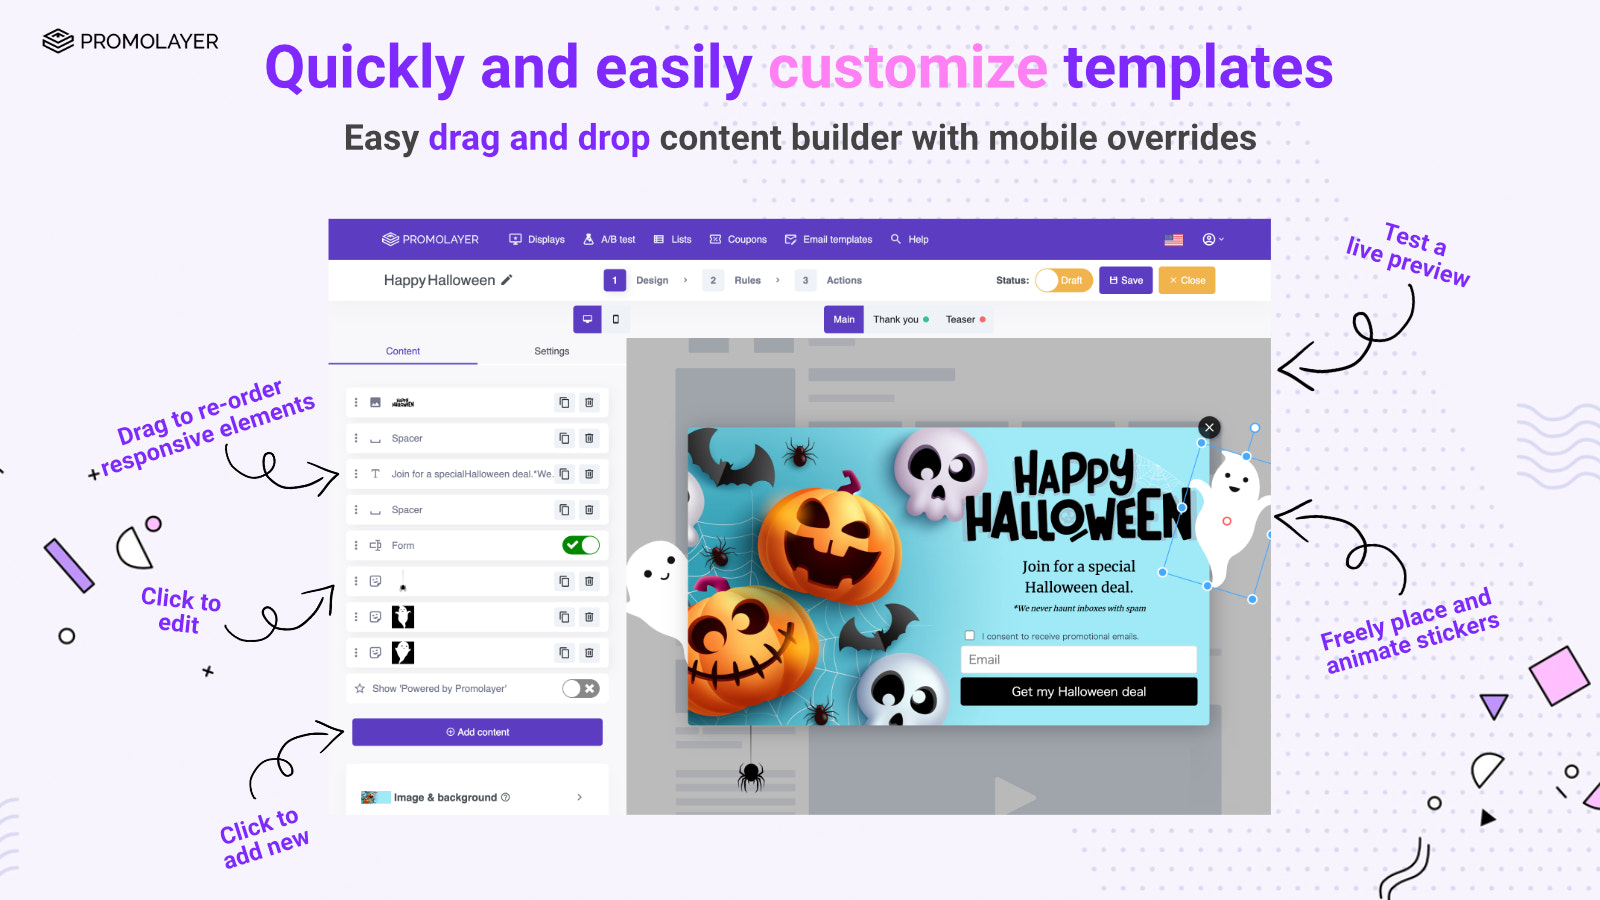 Quickly and easily customize templates.